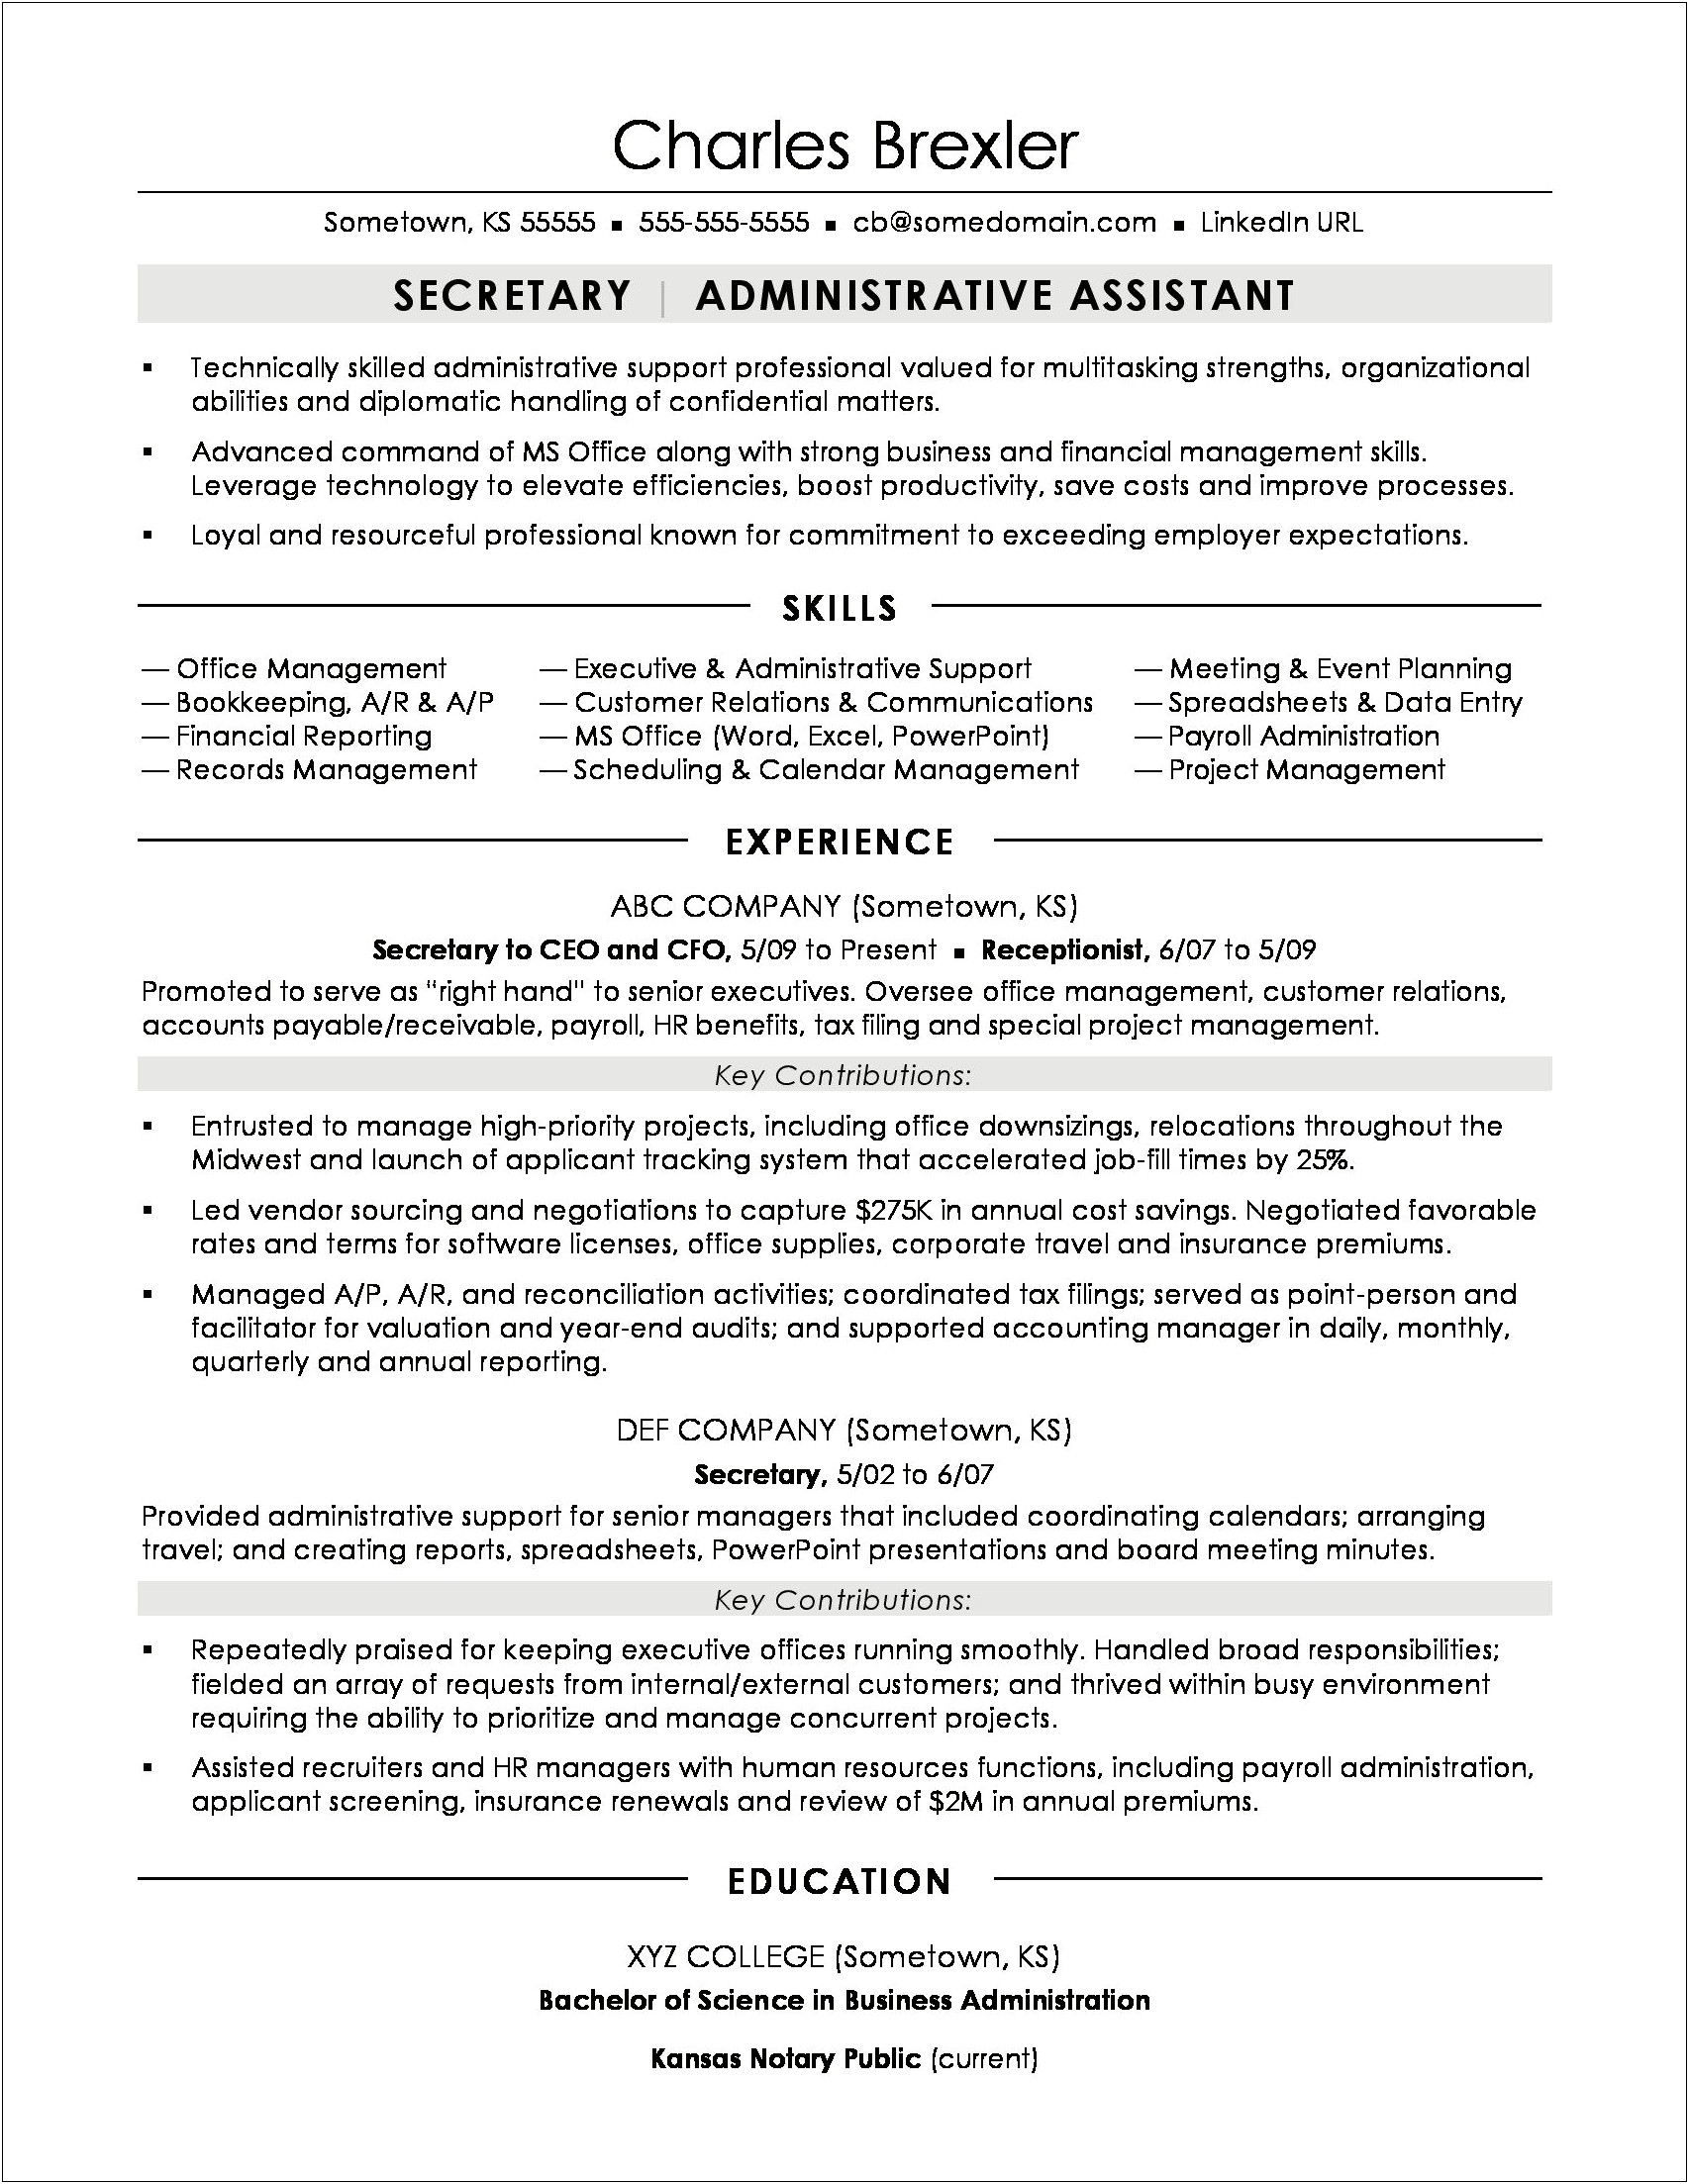 Positive Skills And Strengths For Resume